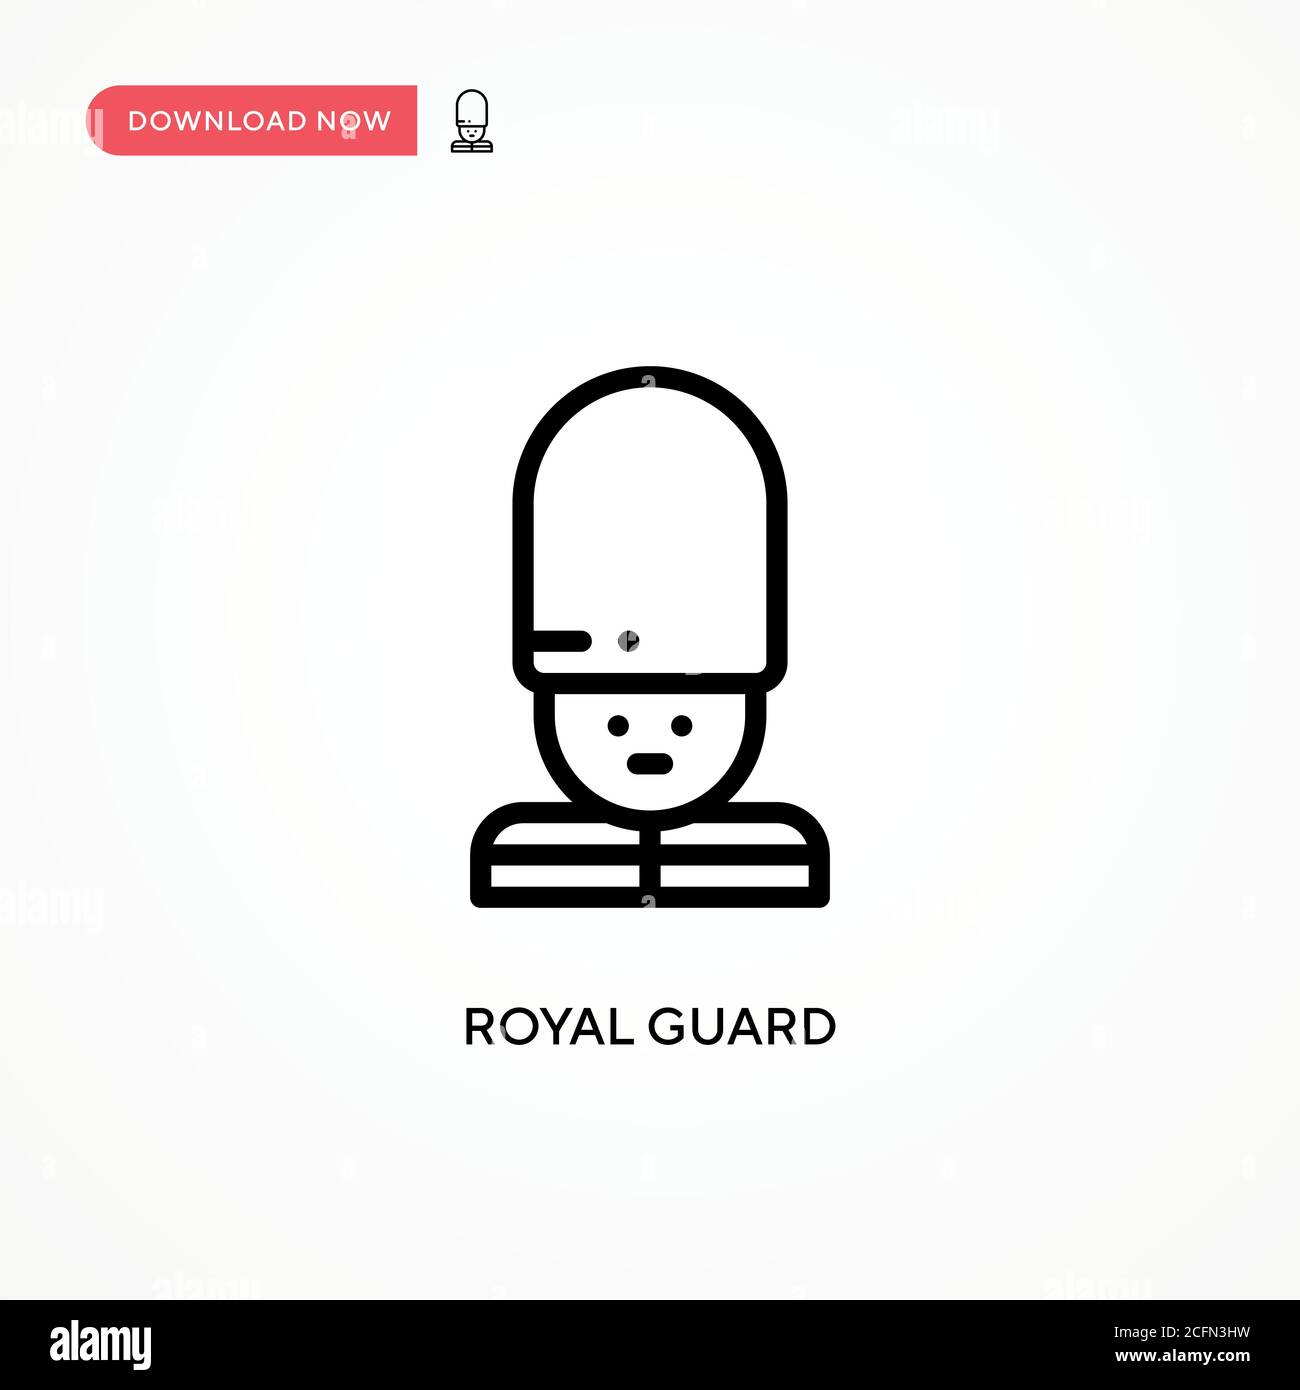 Royal guard vector icon. Modern, simple flat vector illustration for web site or mobile app Stock Vector